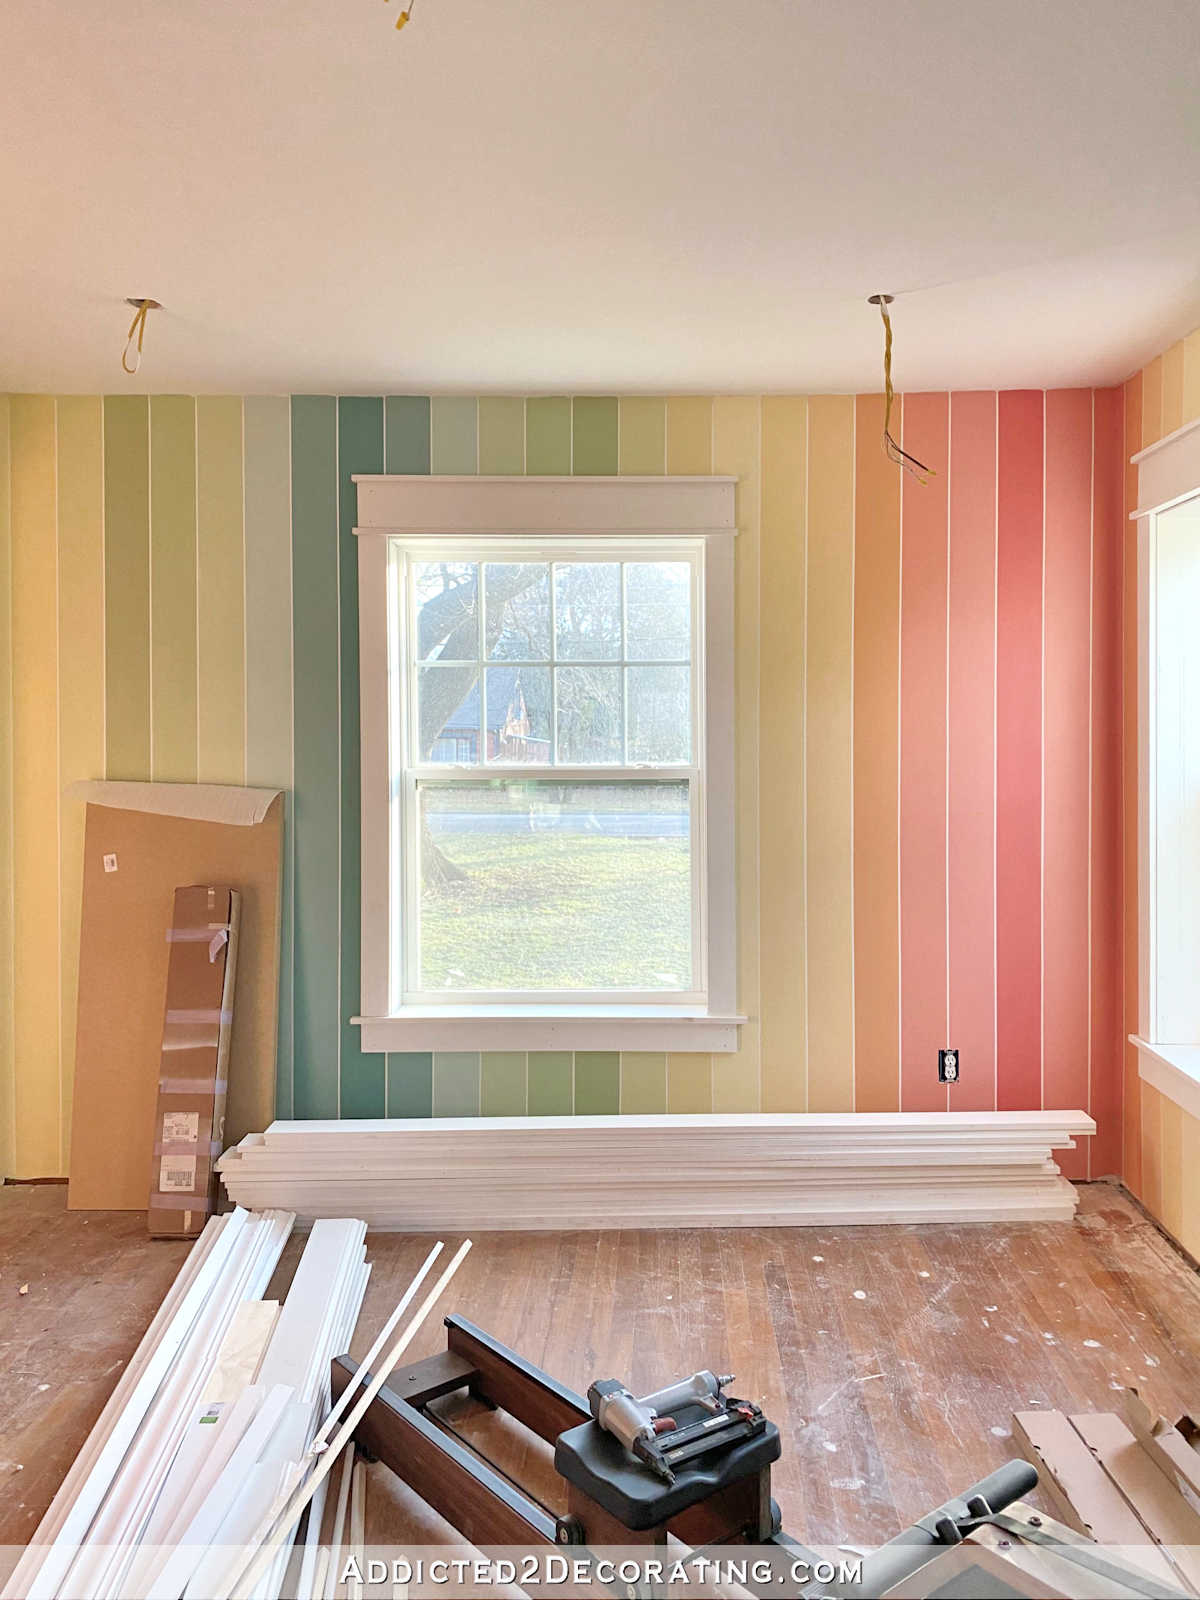 vertical rainbow stripes painted on wall, white window trim